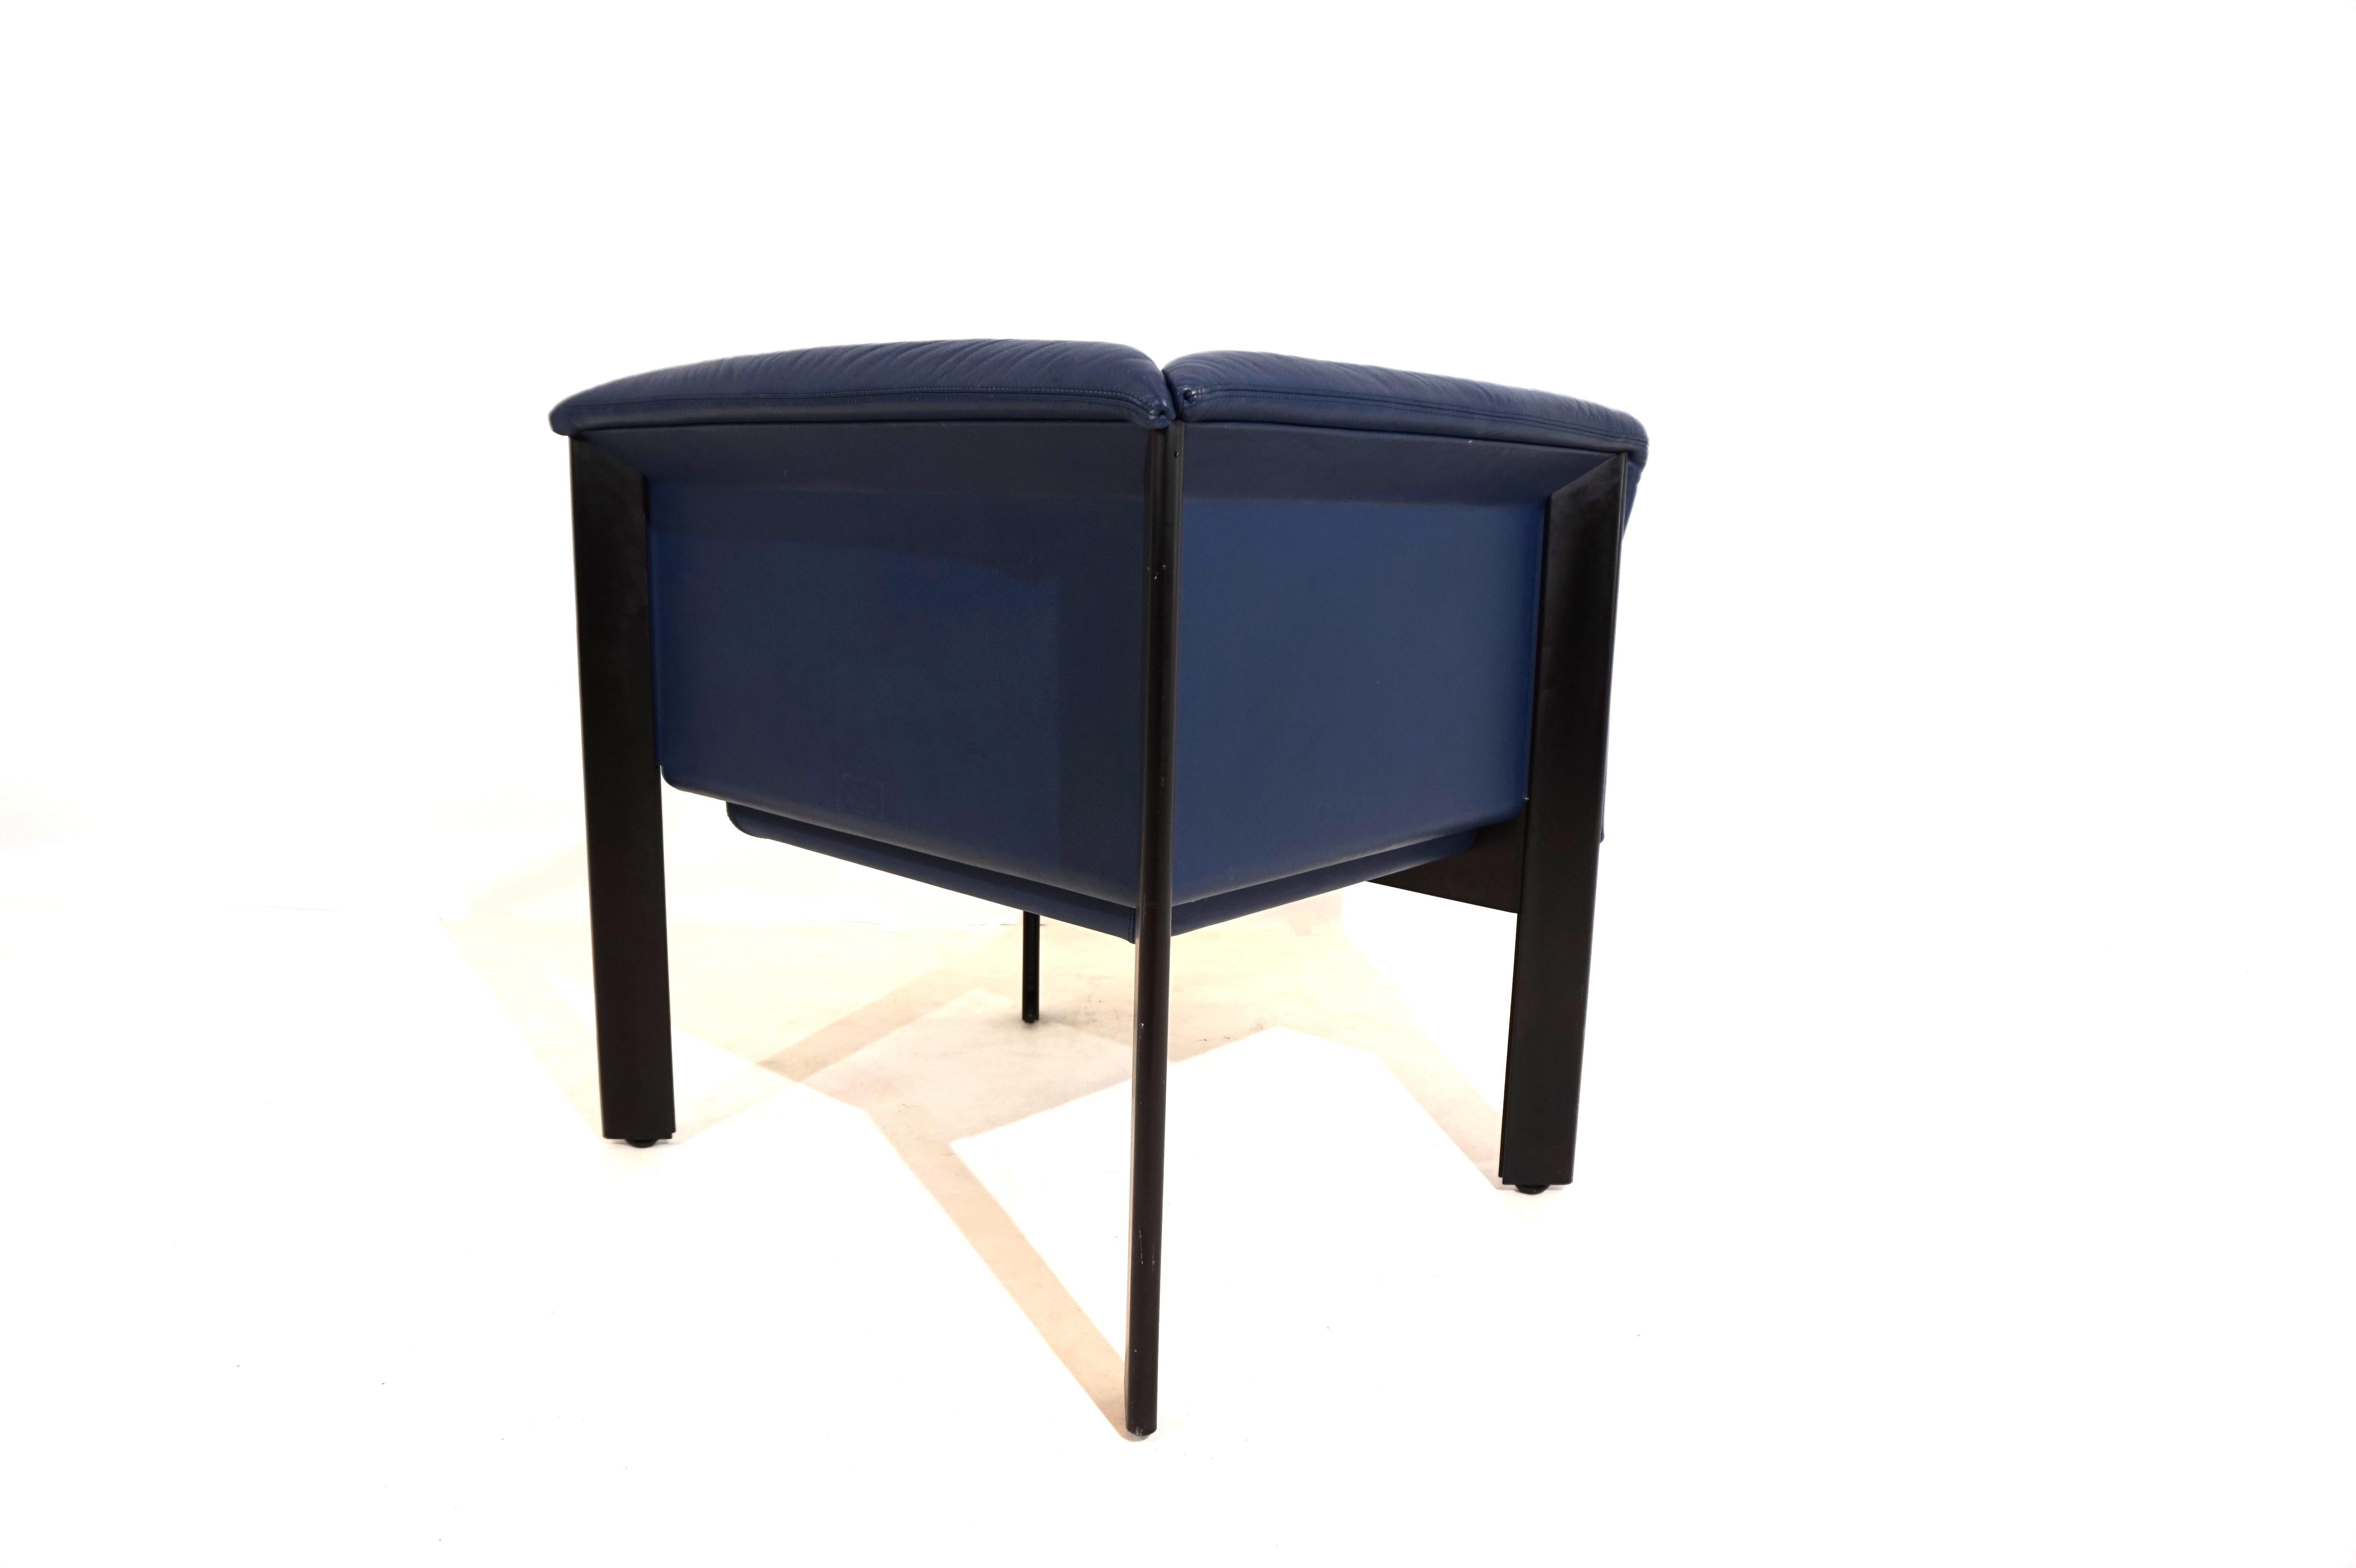 An exceptional interlude by Marco Zanuso for Poltrona Frau, in very good condition. The soft, blue leather of the armchairs only shows minimal signs of wear on one corner of the back. The leather paneling on the sides is in perfect condition. The